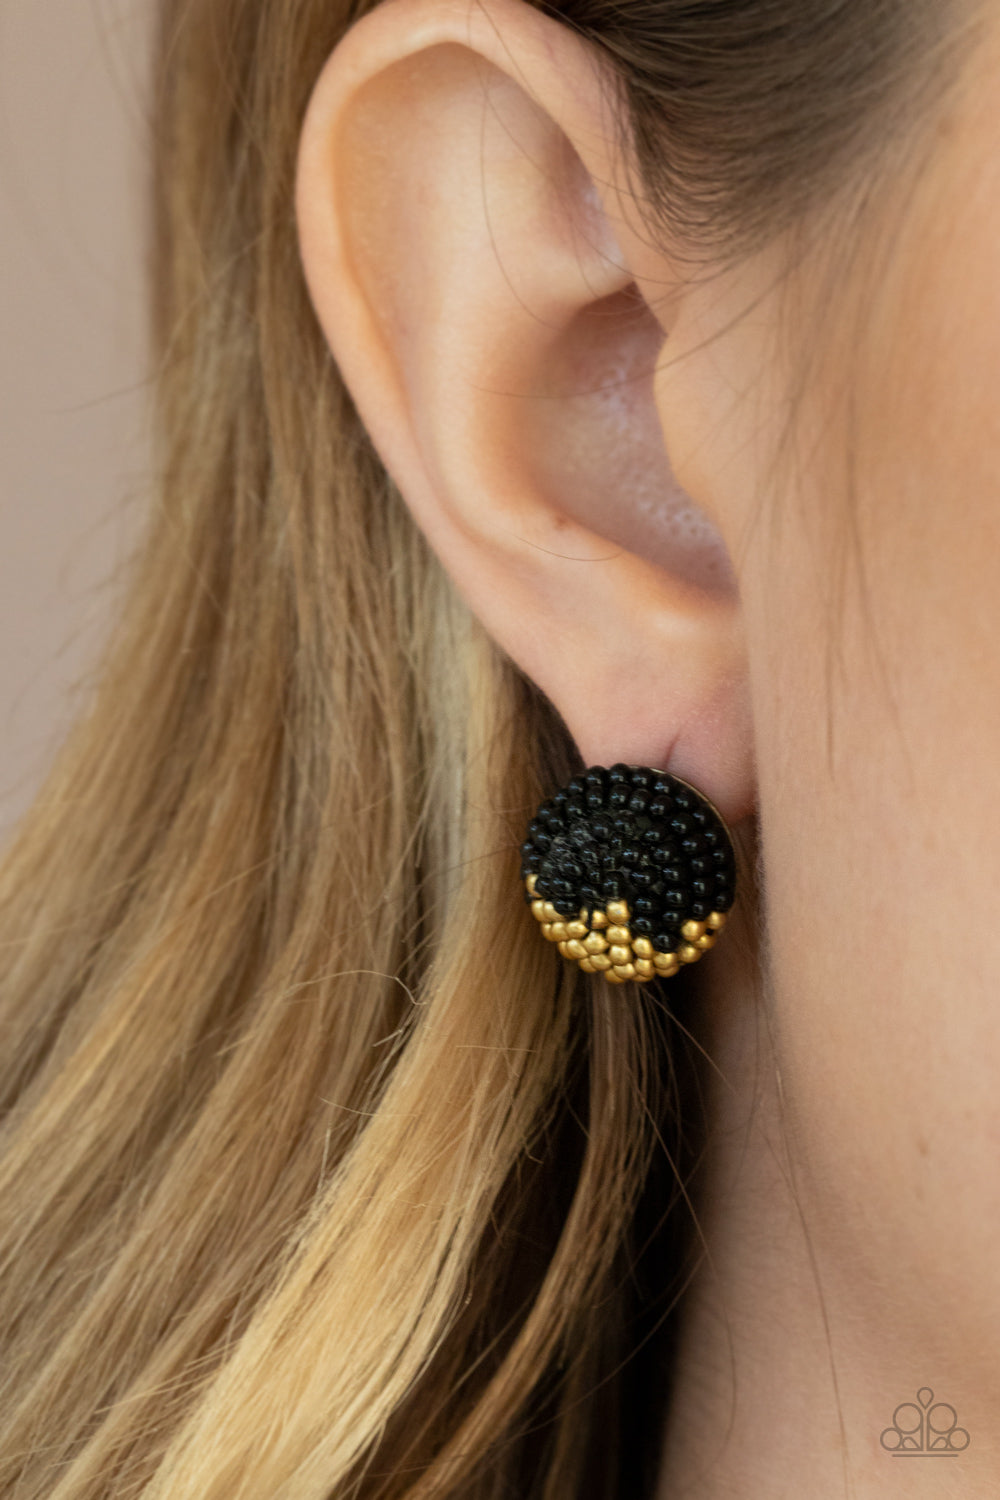 As Happy As Can BEAD - Black Item #P5PO-BKXX-150XX A dainty collection of black and brassy seed beads embellished the front of a circular frame, creating a colorful half and half pattern. Earring attaches to a standard post fitting.  Sold as one pair of post earrings.